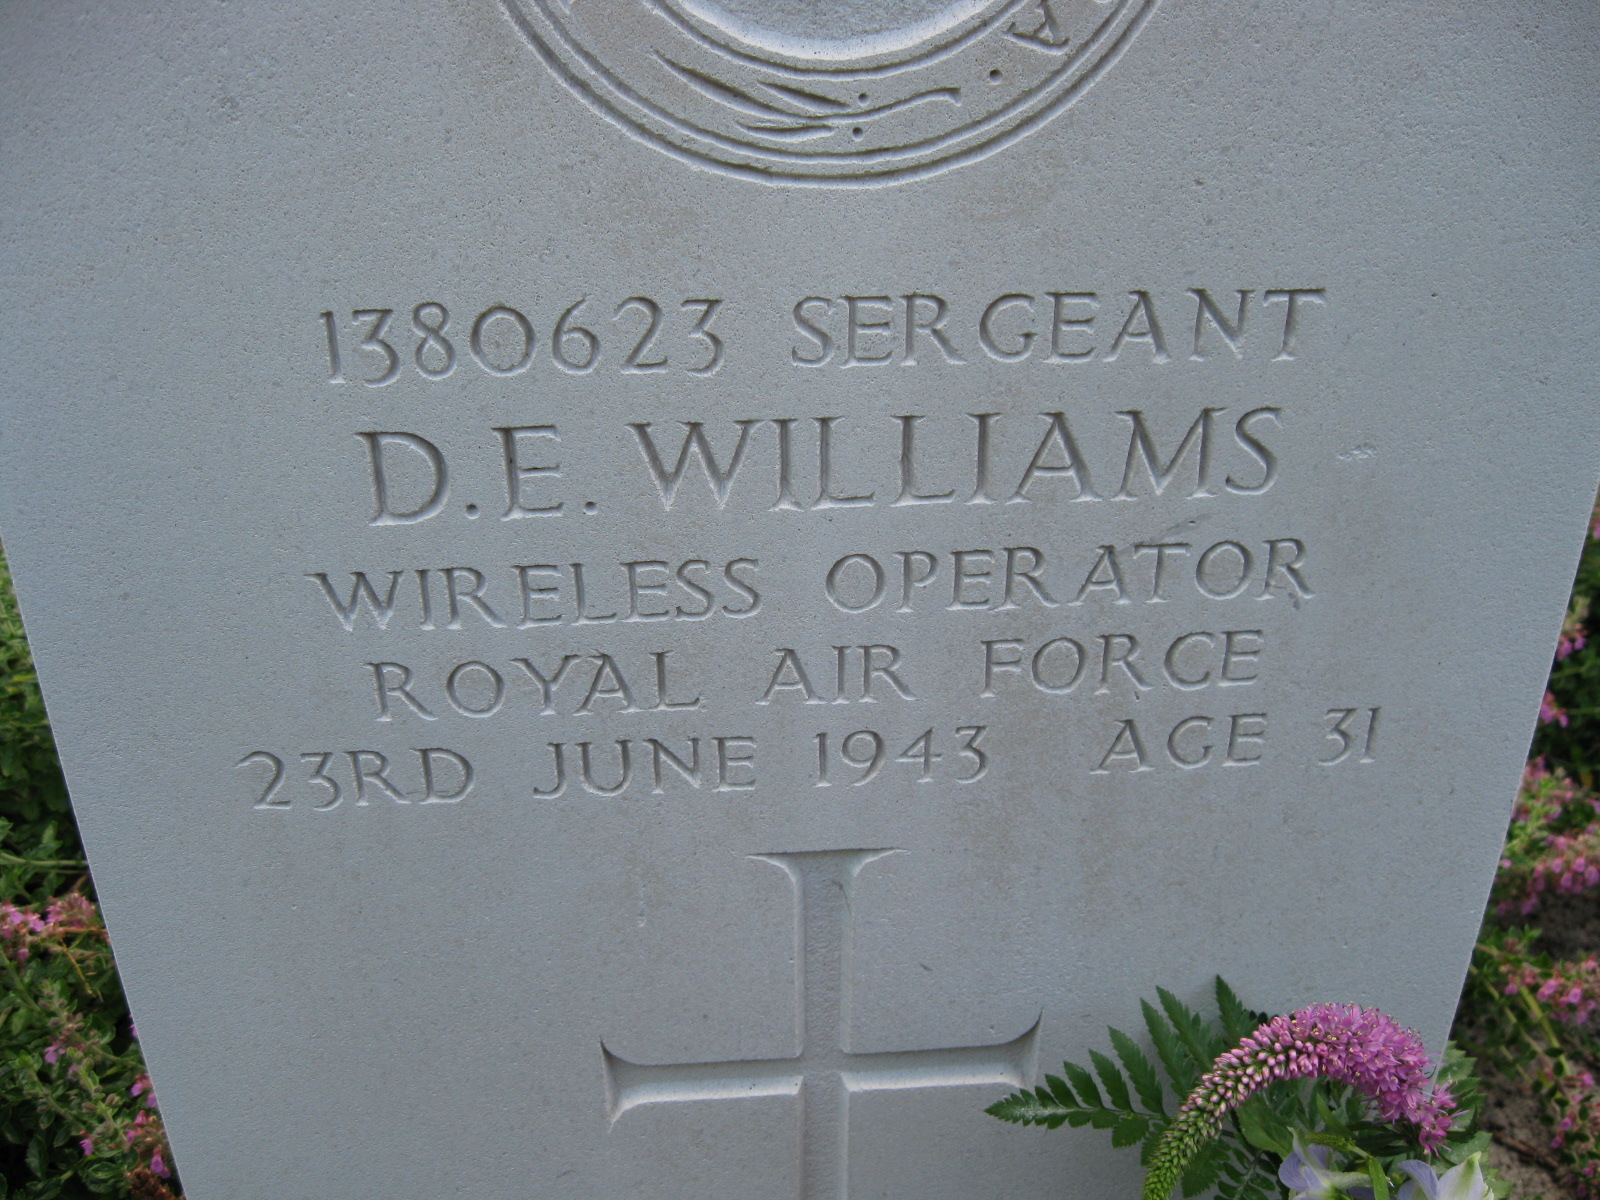 Headstone from recent visit in 2013